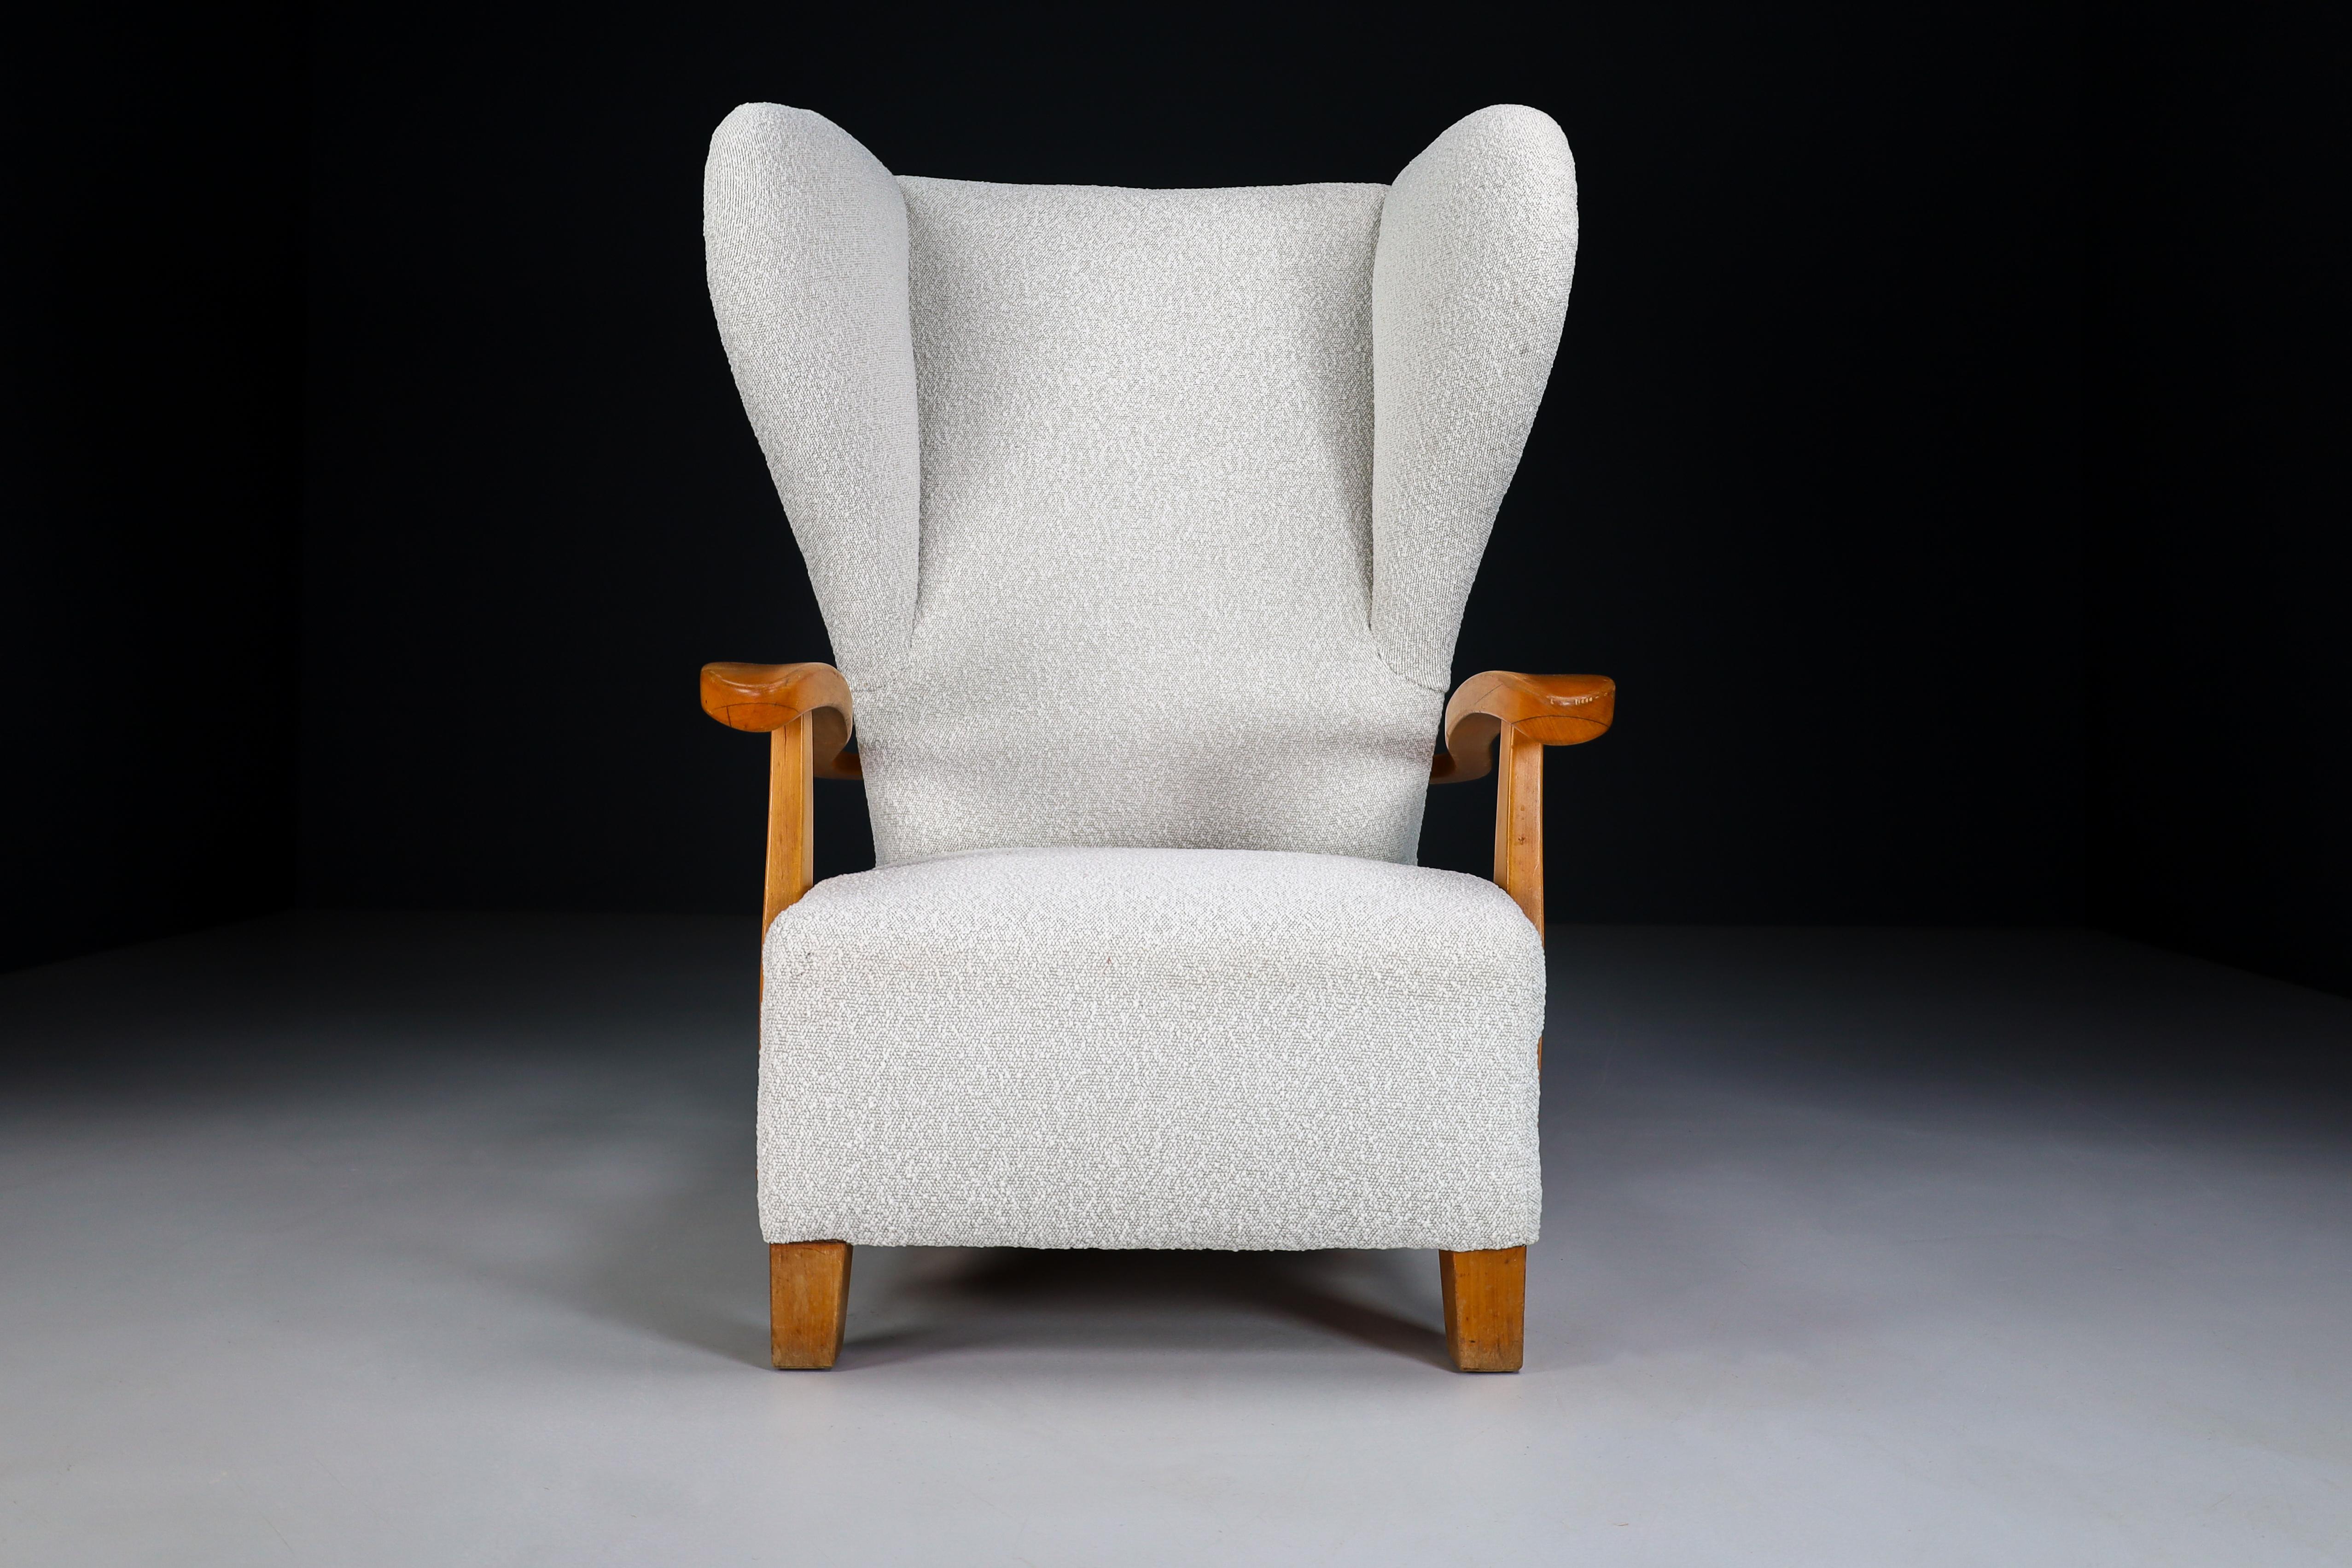 French XXL Monumental Wingback Armchair in Walnut and Bouclé Fabric, France 1930s For Sale